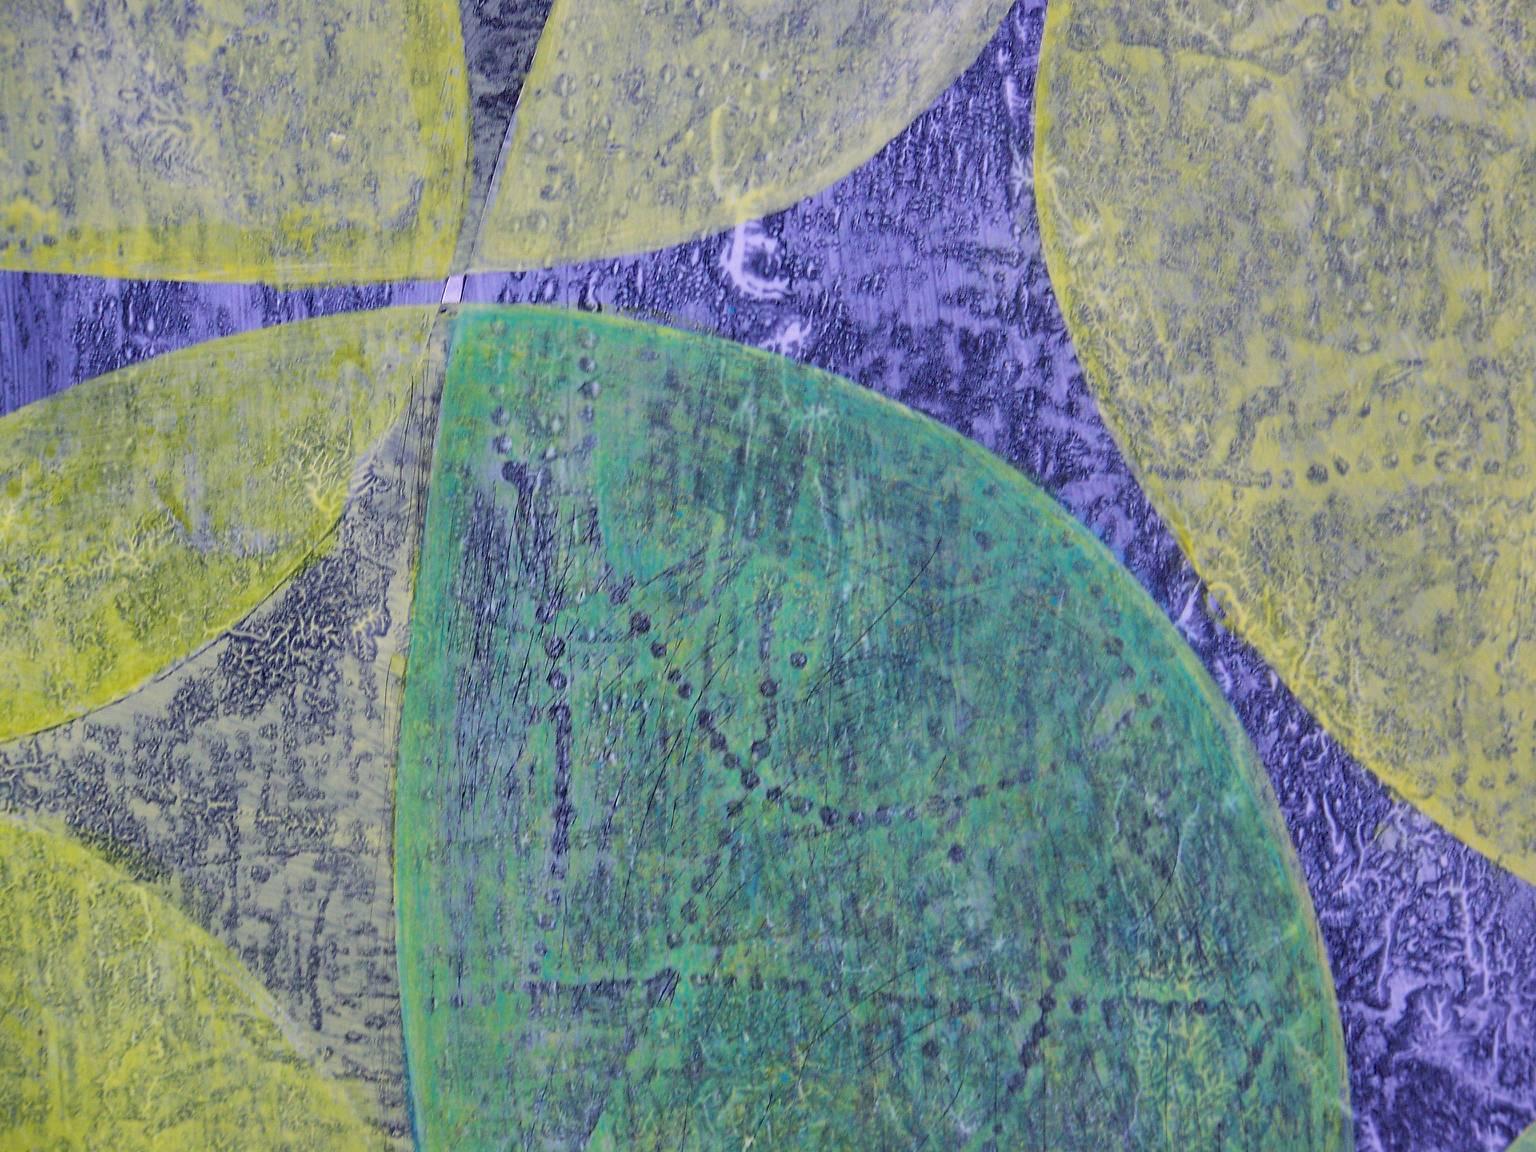 Inner Garden 25 - Gray Abstract Painting by Denise Driscoll